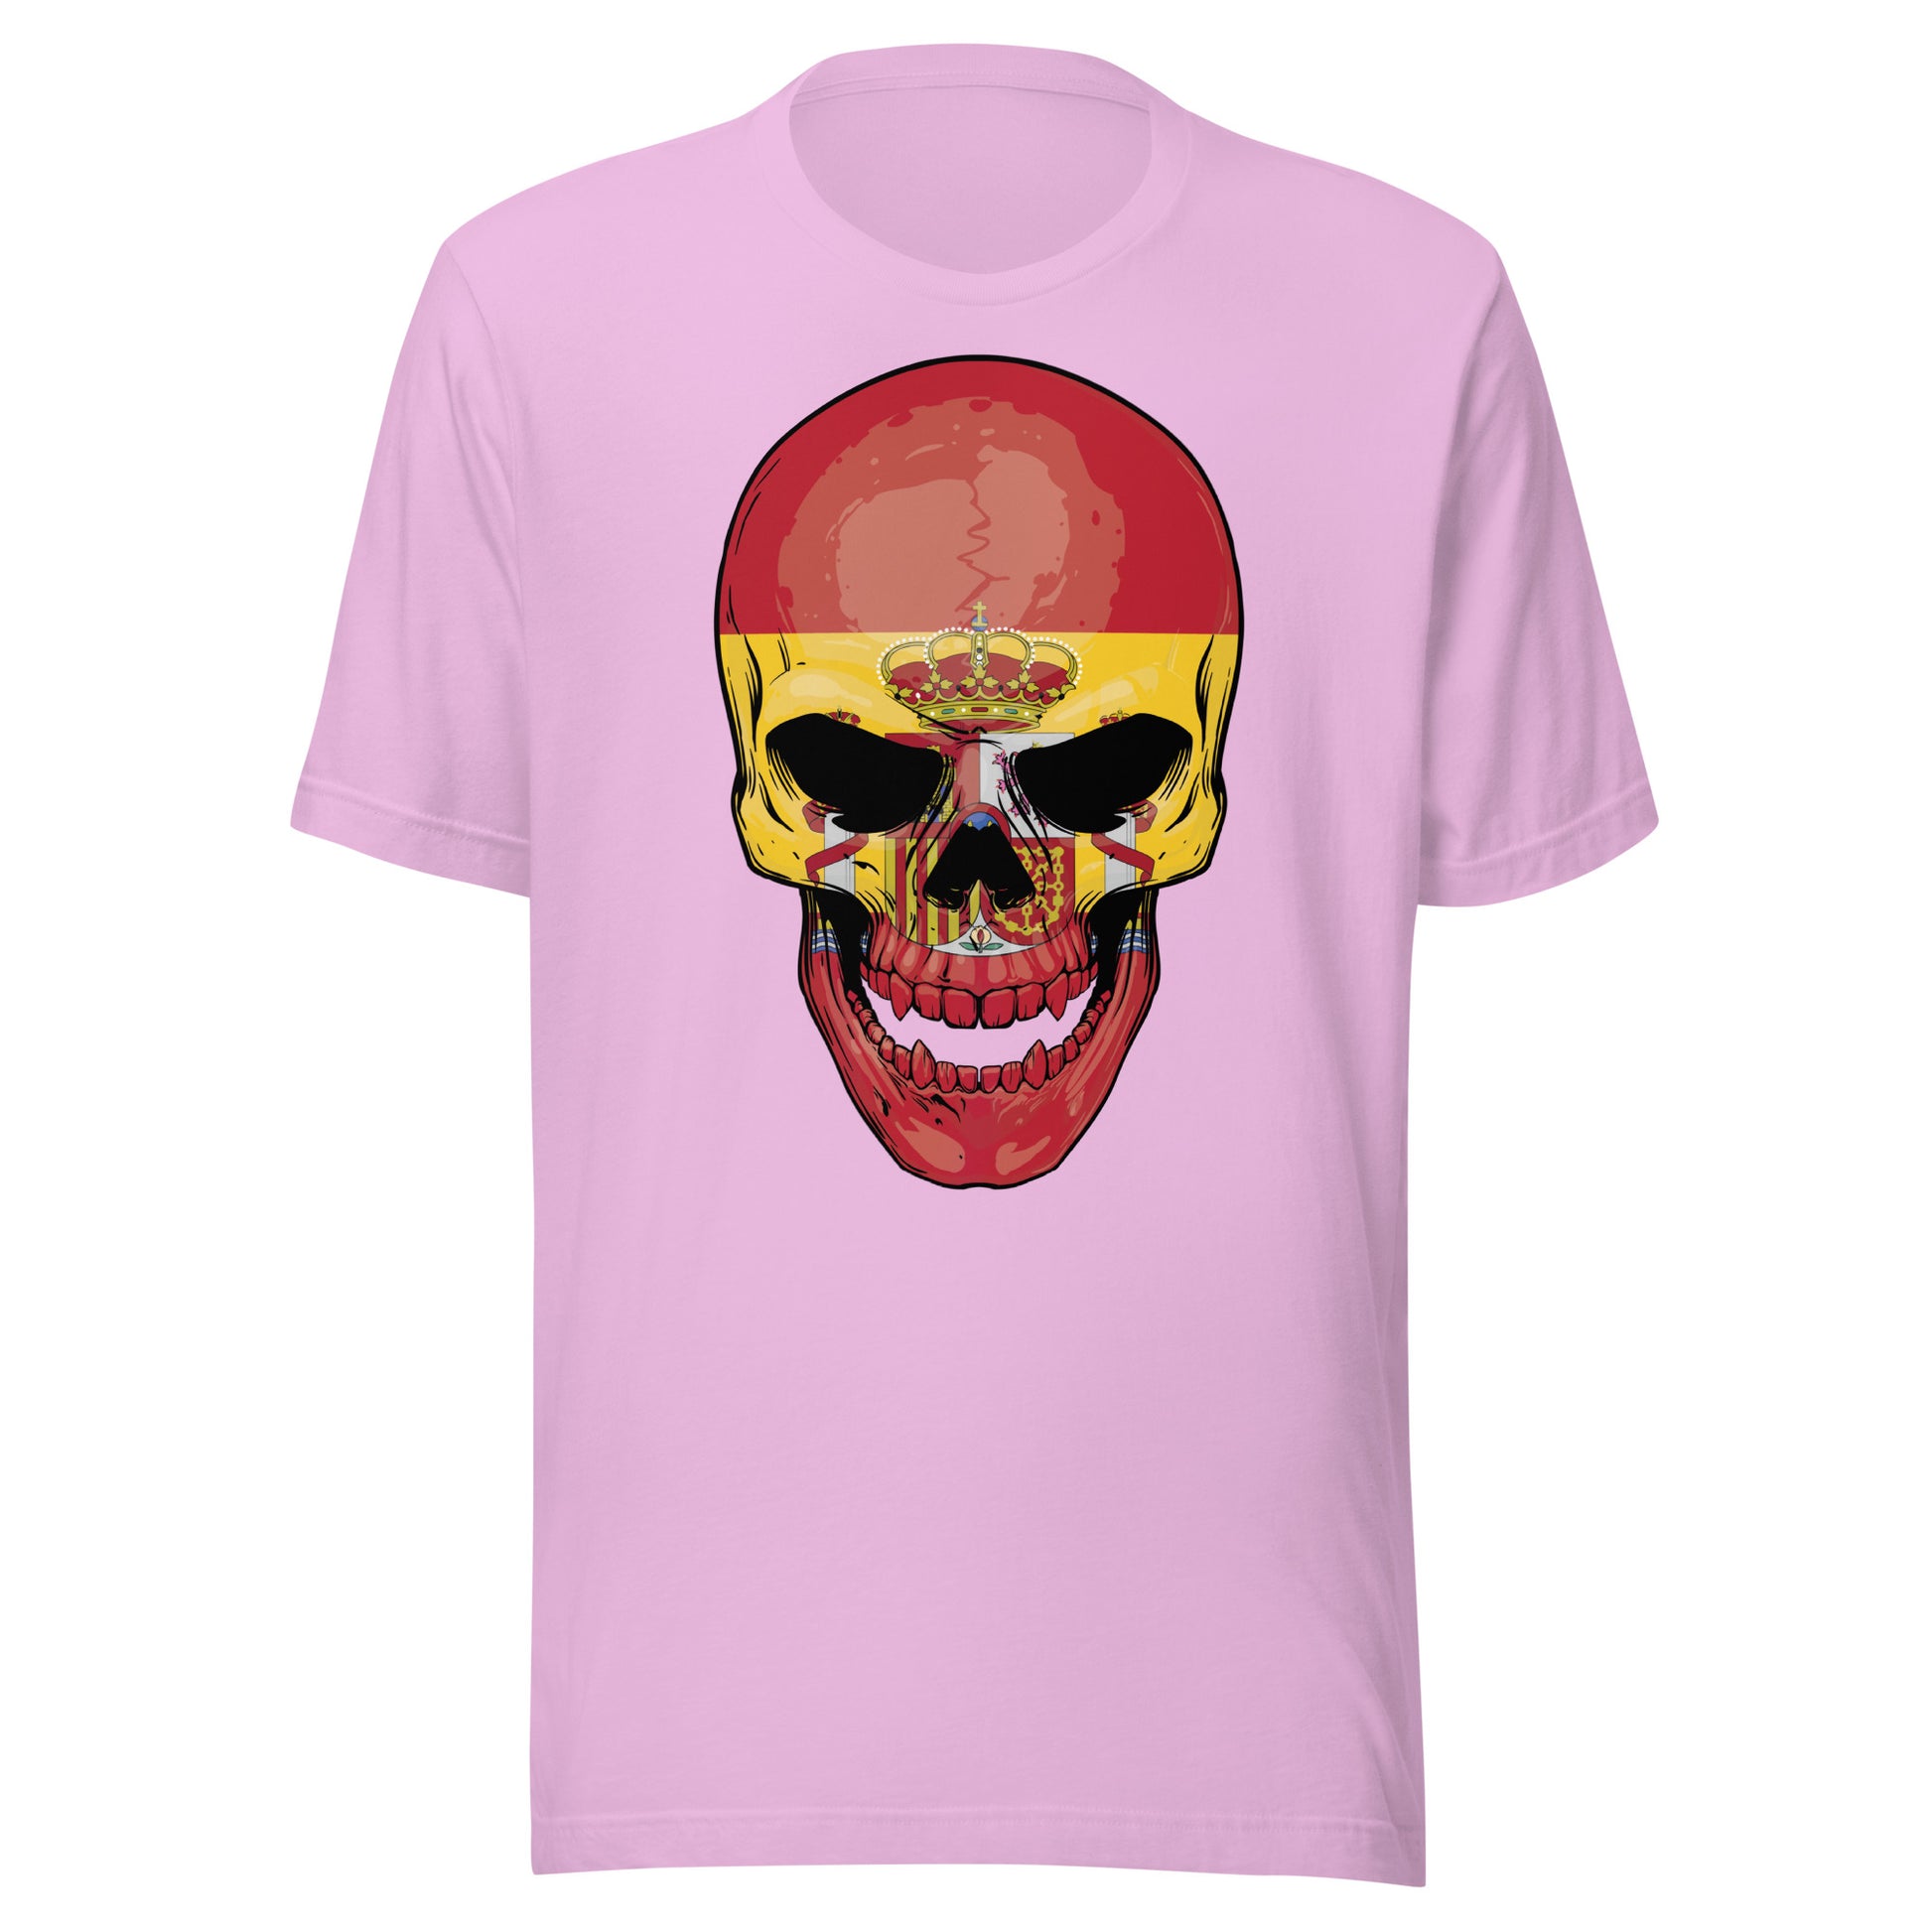 Express Your Passion For Spain With This Skull T-Shirt